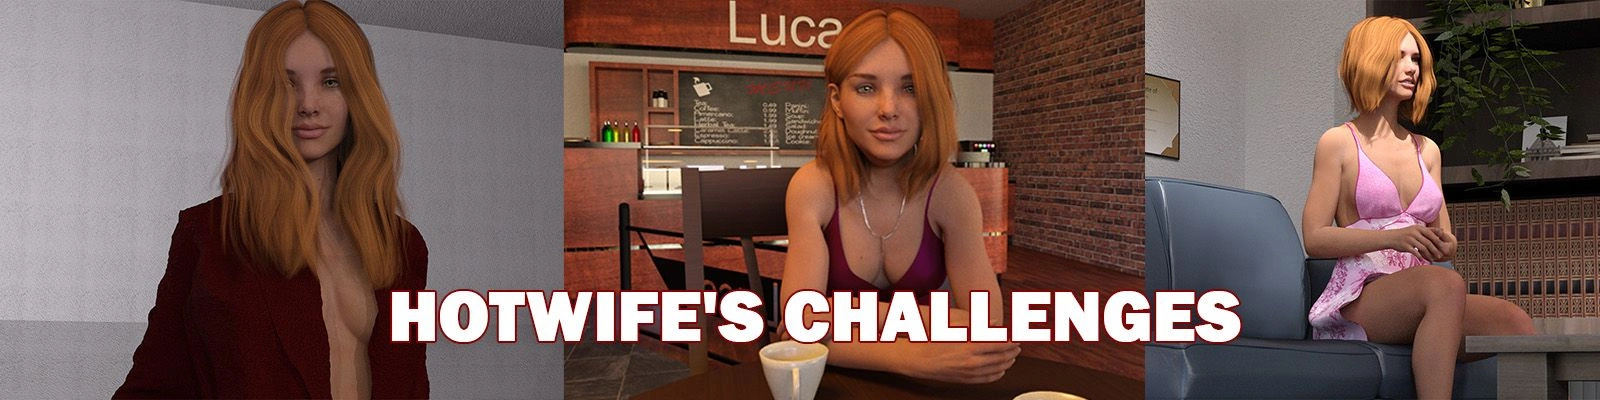 Hotwife's Challenges [v0.5] main image